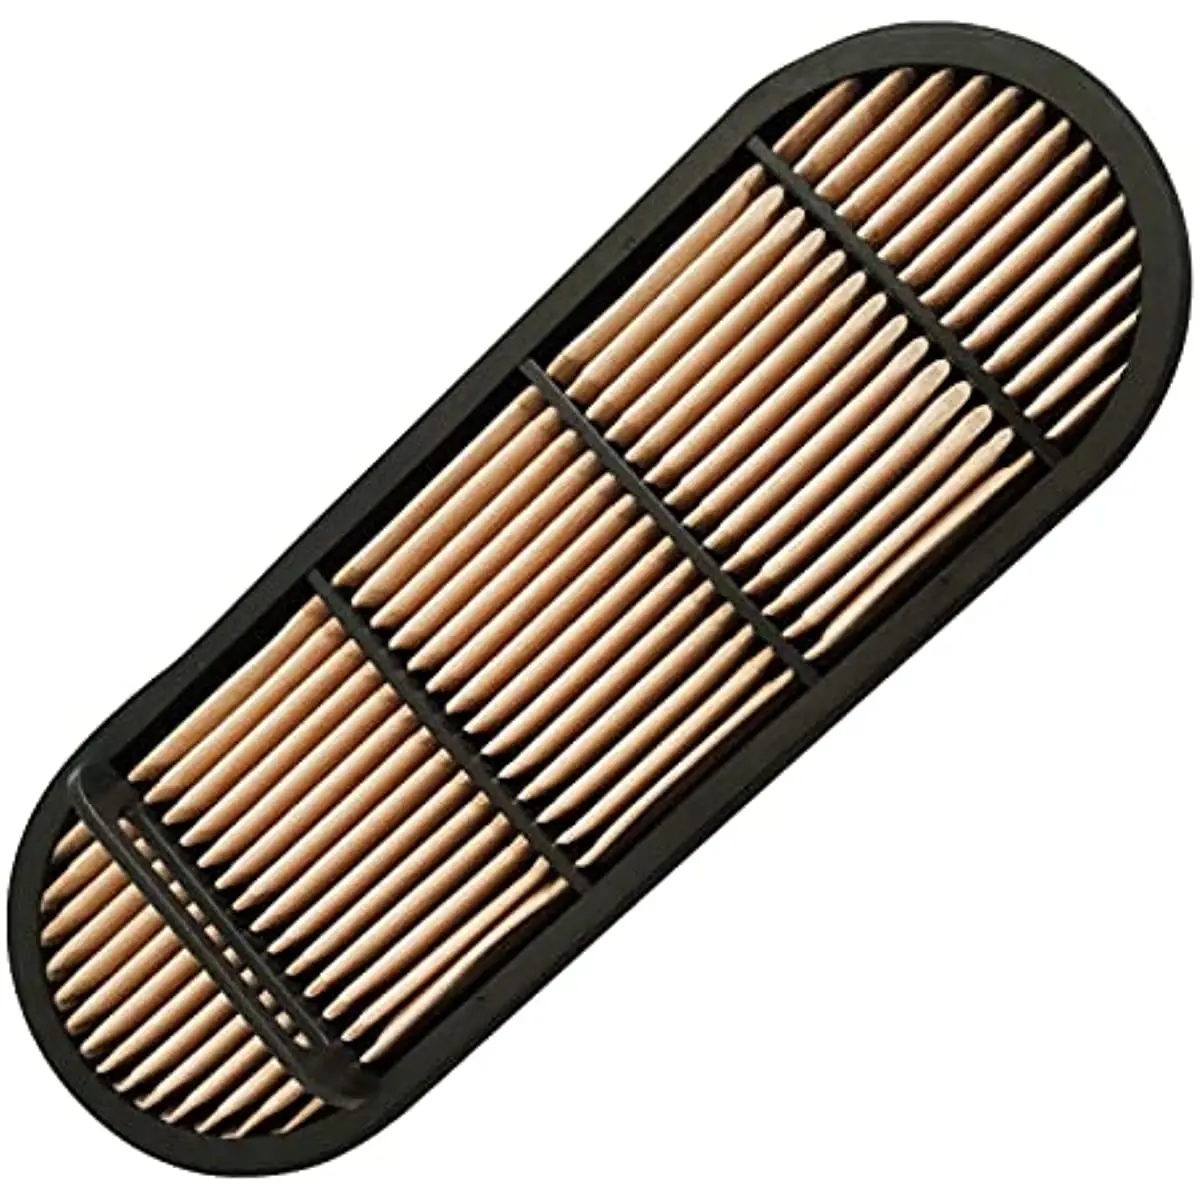 P606121 air filter for jd 5000 6000 7000 series tractor claas arion 520 630 c 630 thumb200